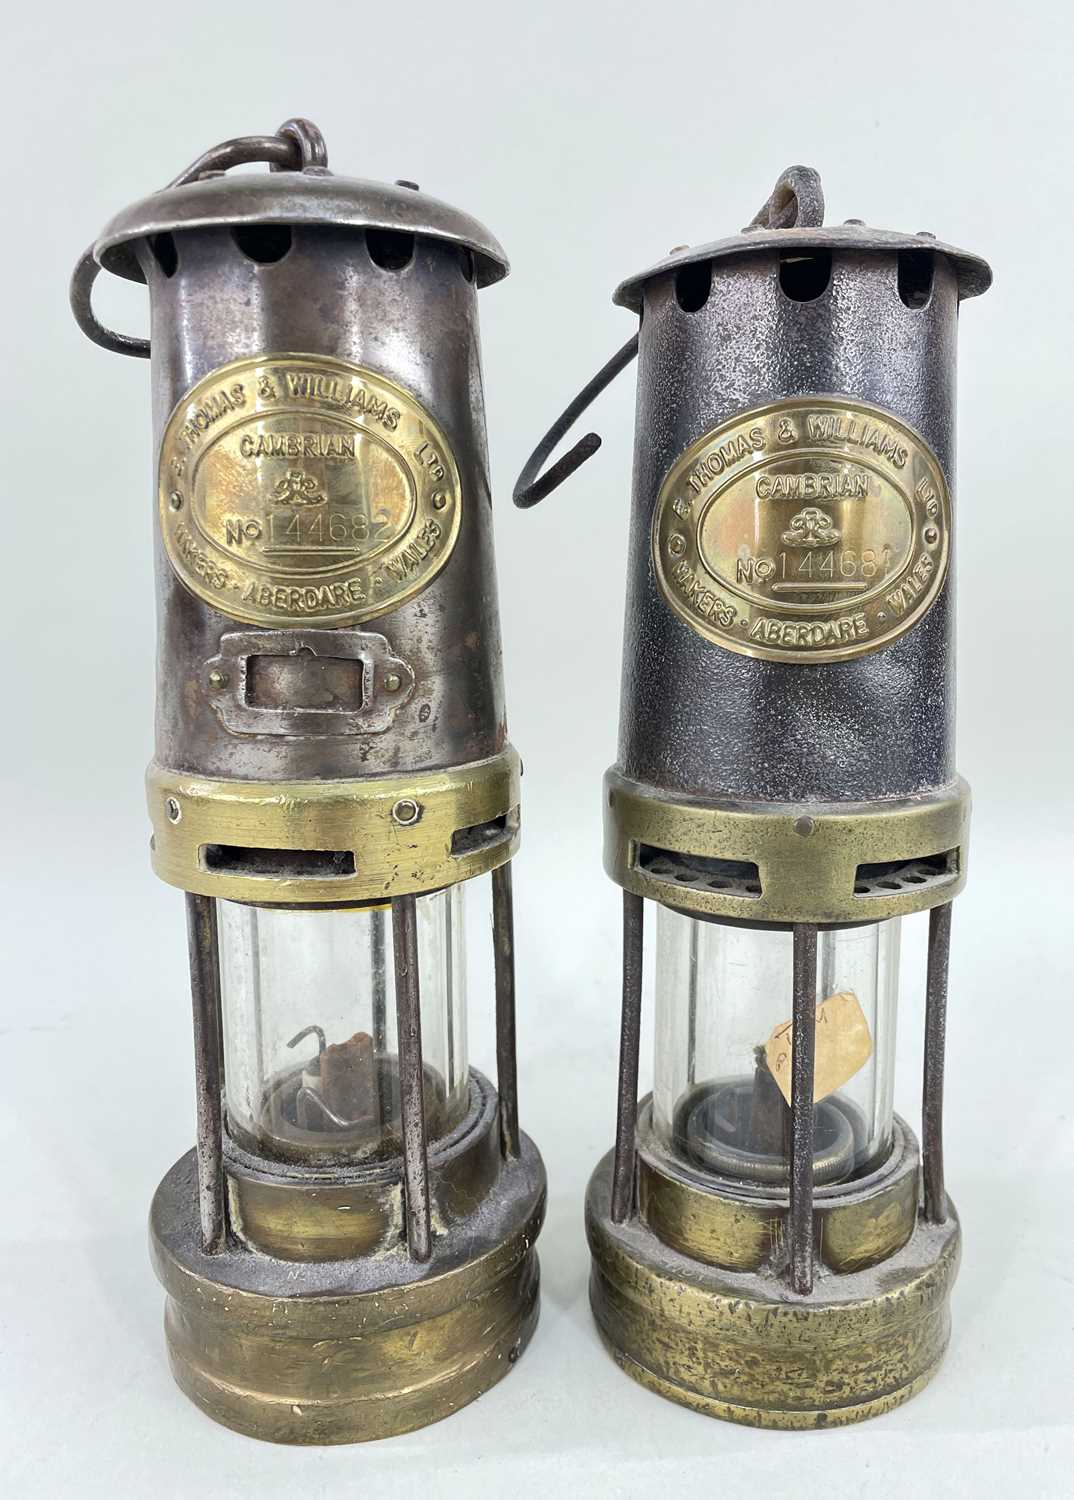 TWO THOMAS & WILLIAMS LTD. 'CAMBRIAN' MINER'S SAFETY LAMPS, consecutively numbered 144681 and